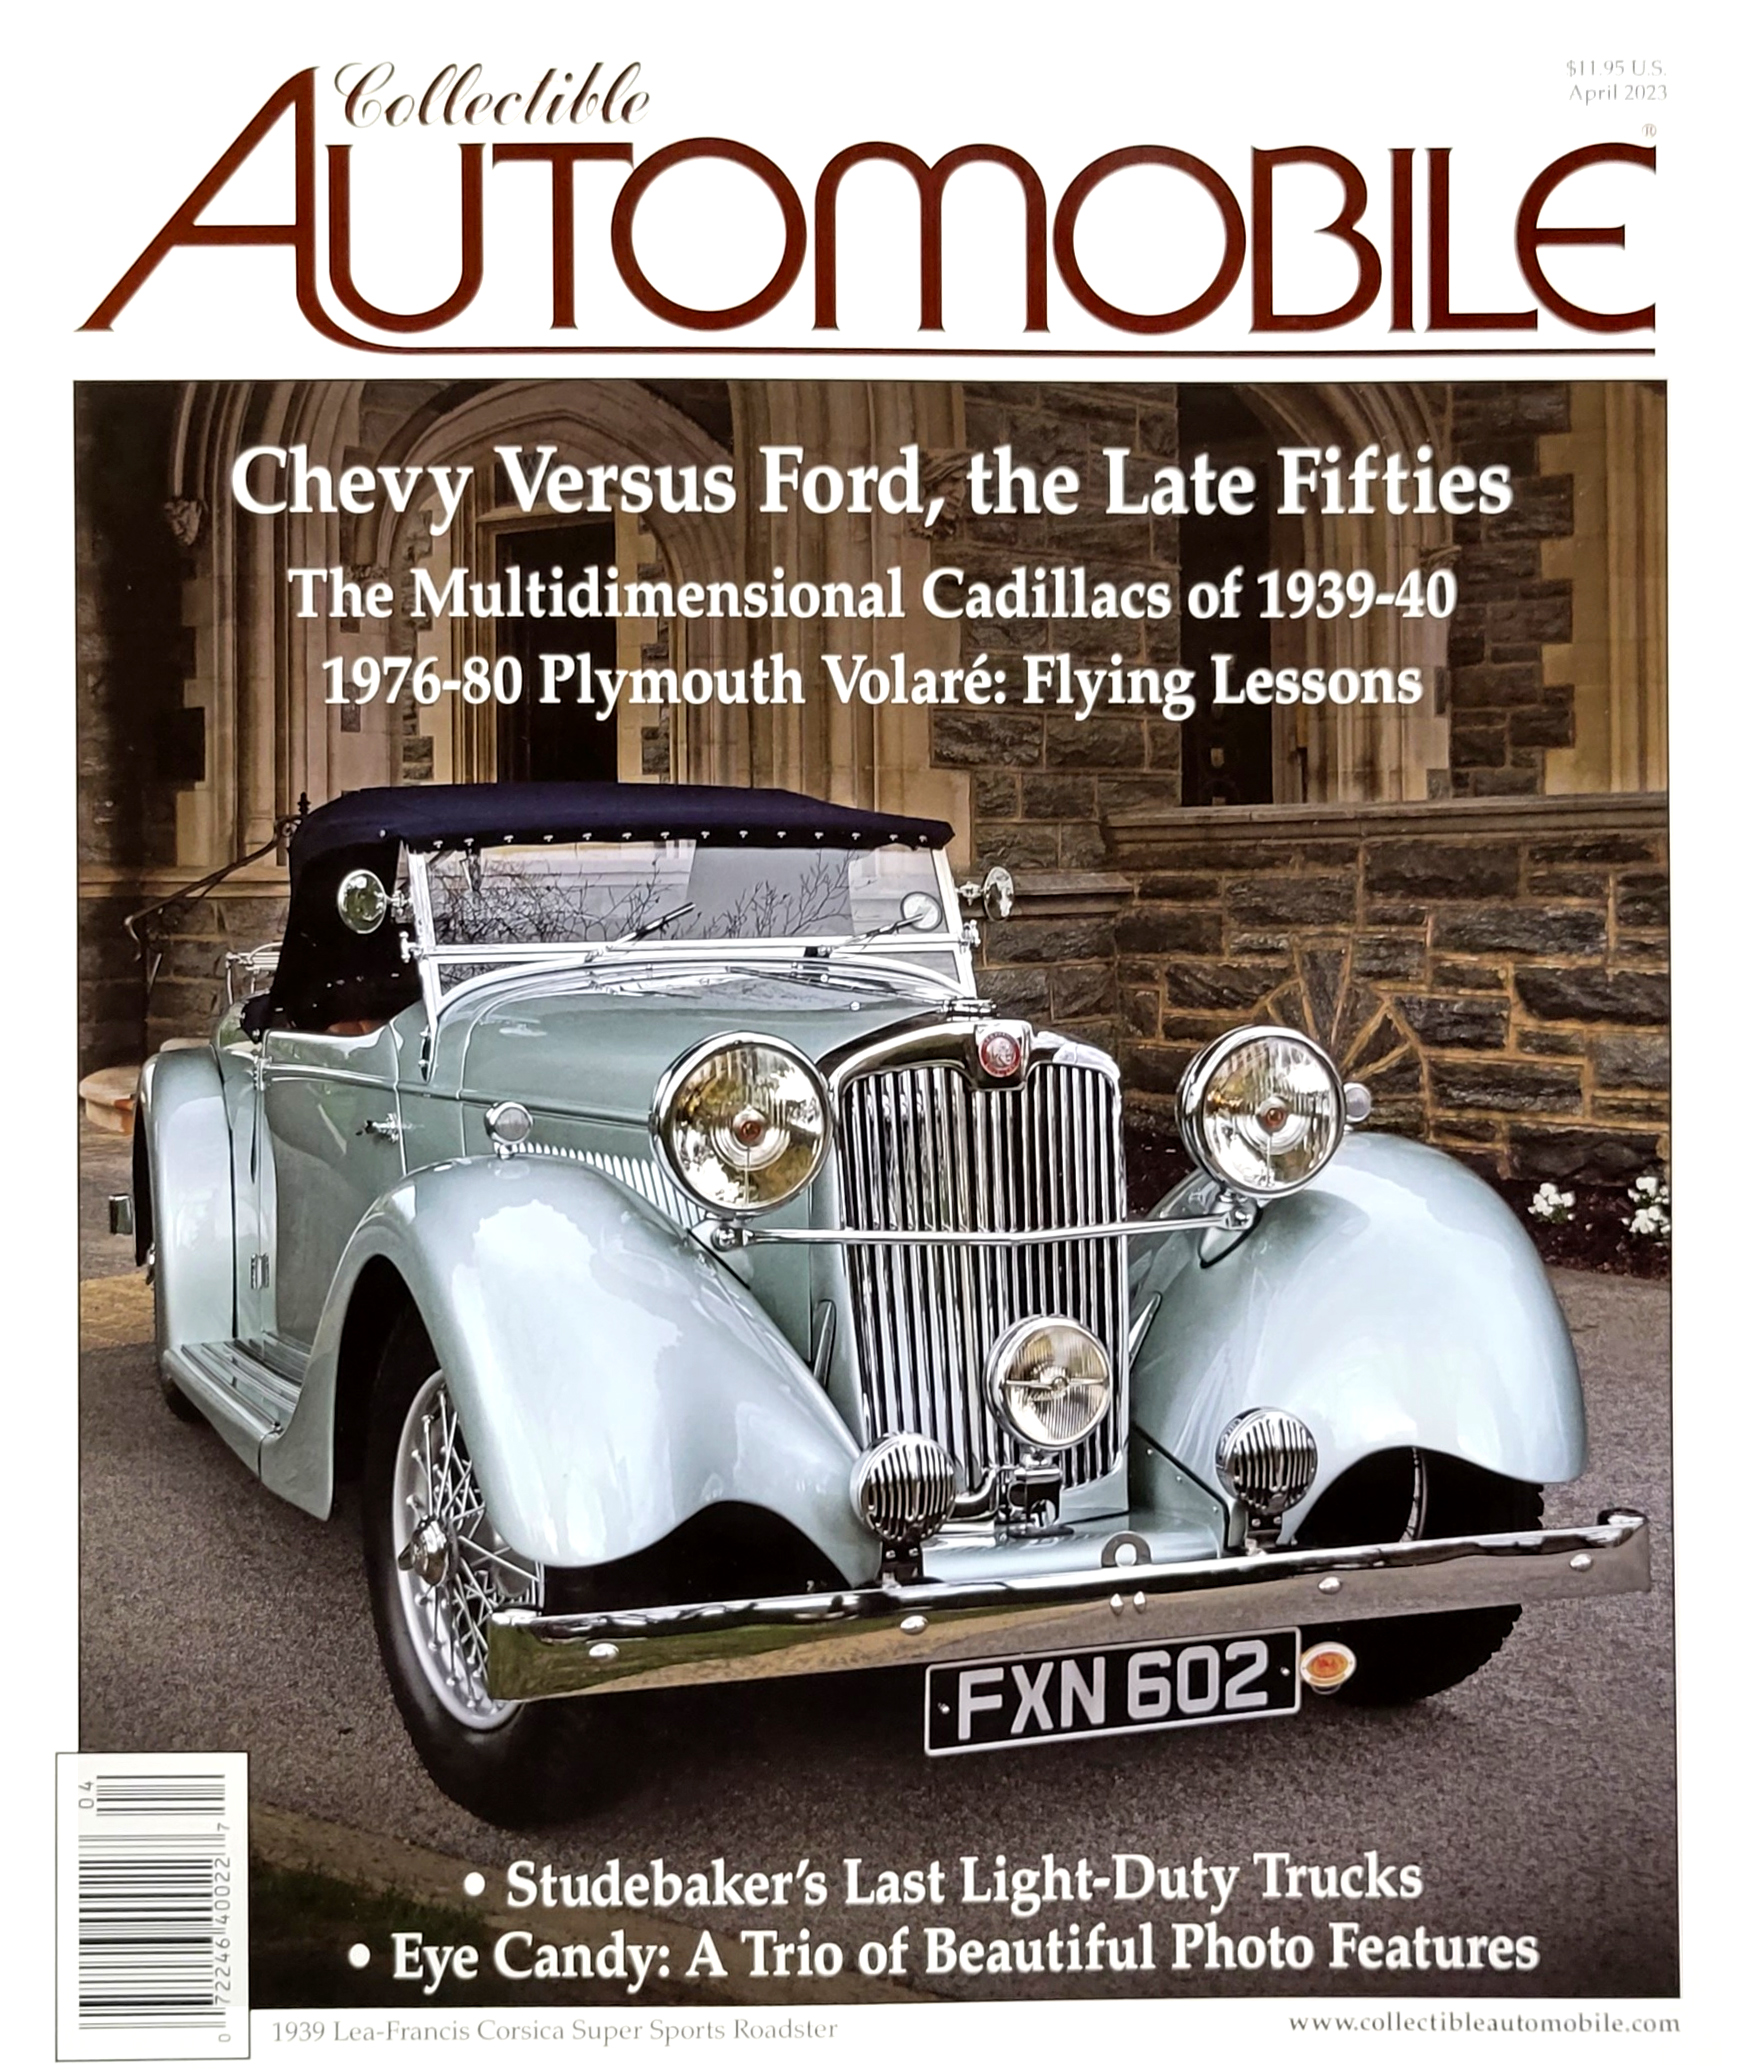 Subscribe to Collectible Automobile Magazine